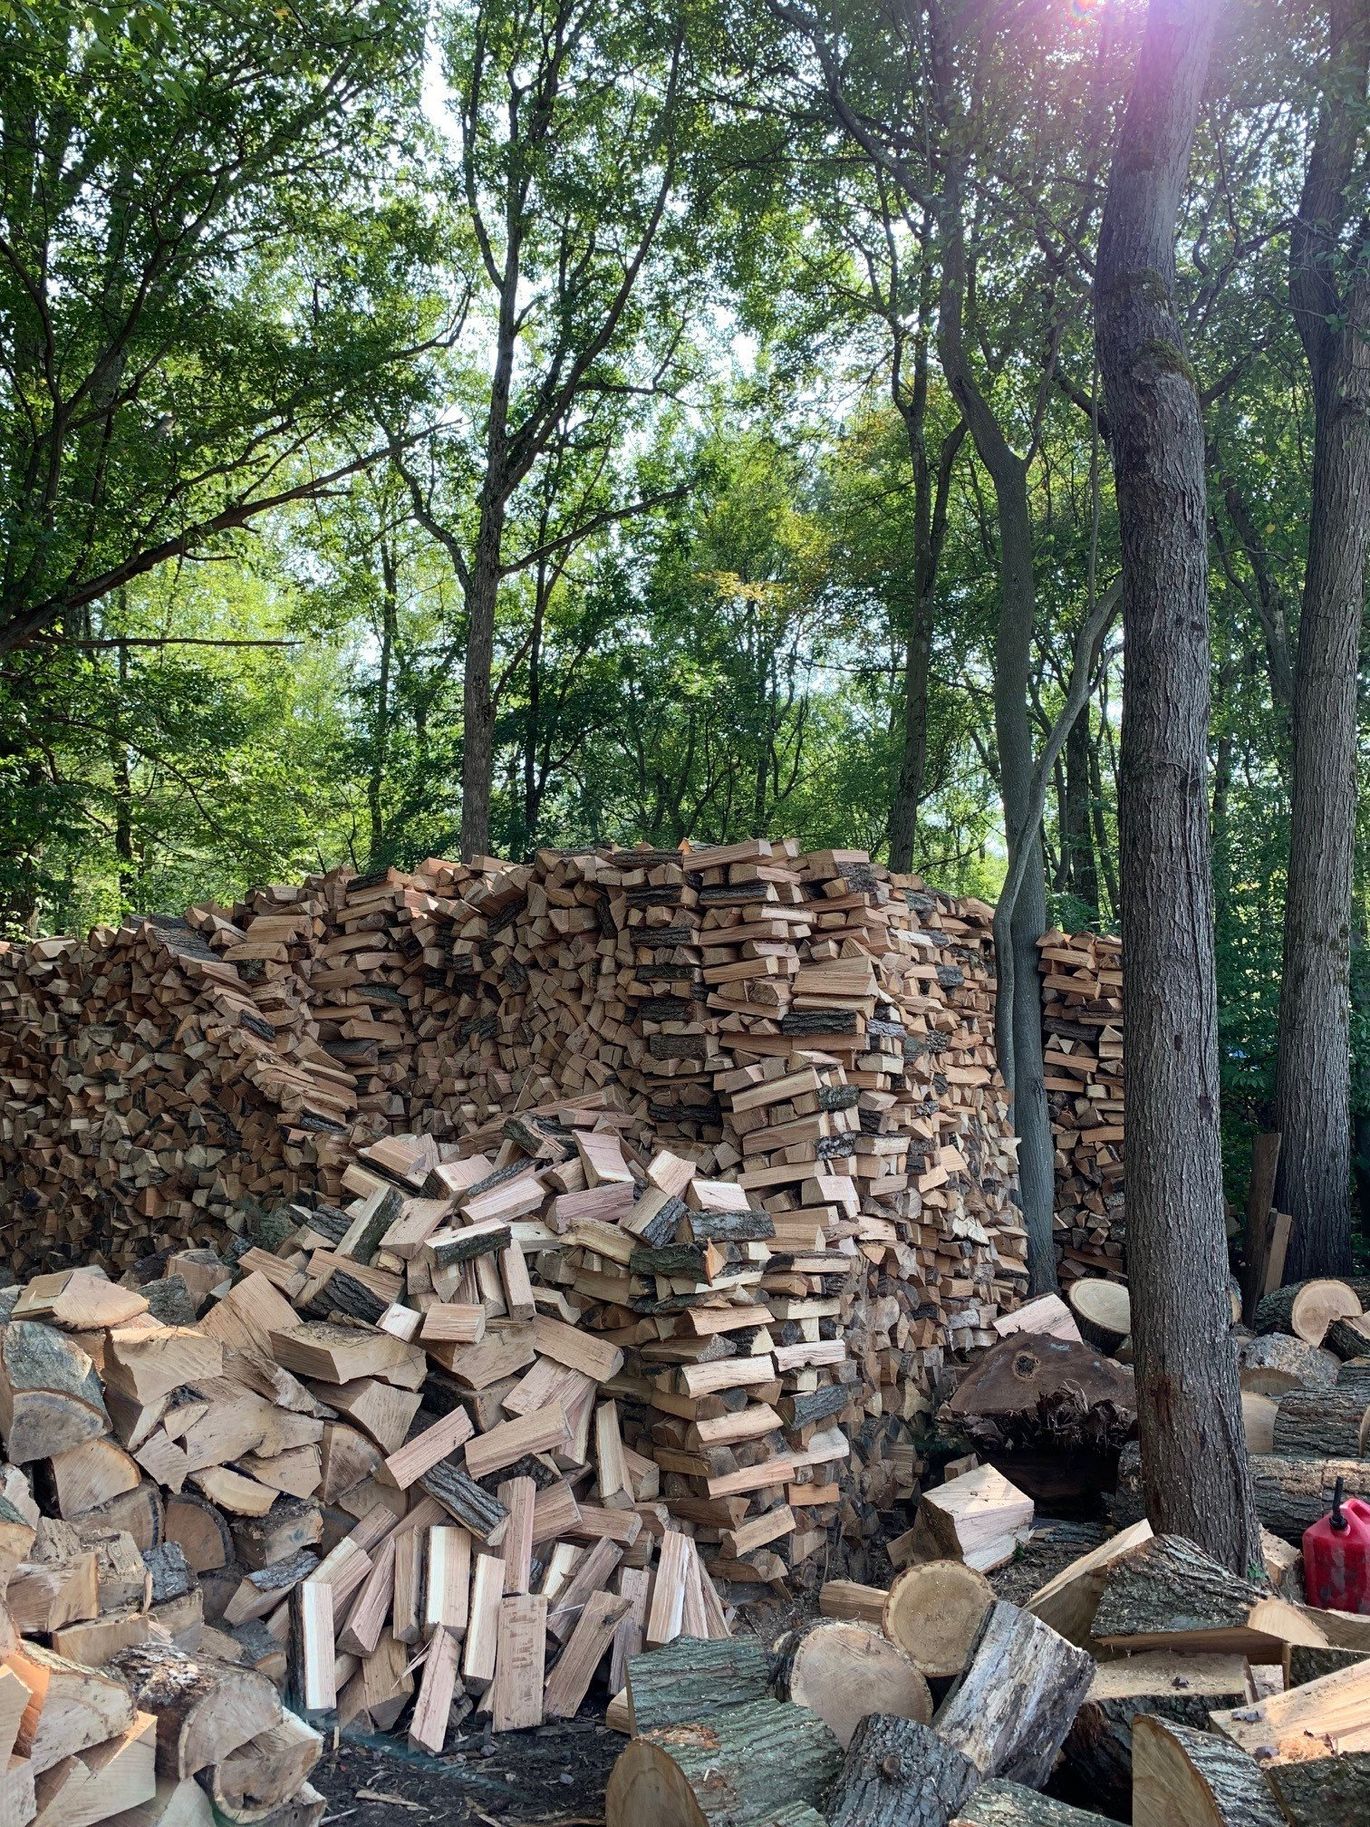 Firewood Reserve — Stacks of firewood in Succasunna, NJ